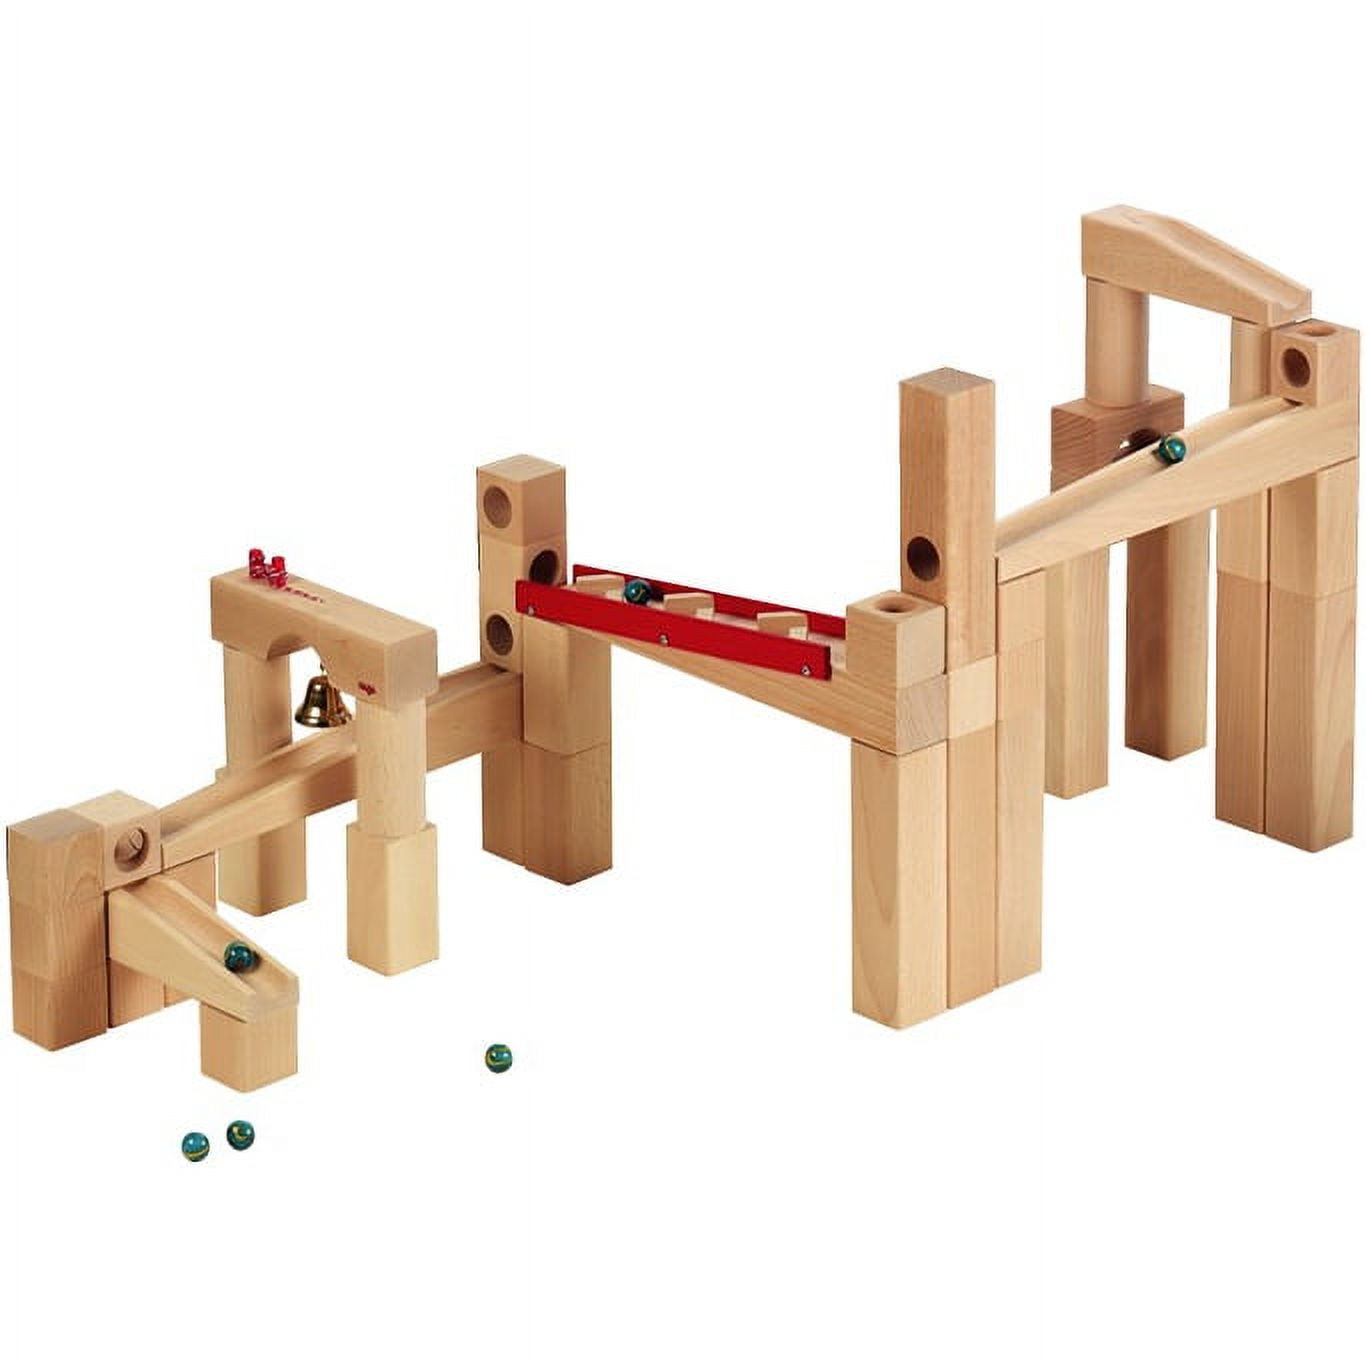 HABA Ball Track Large Basic Set - 42 Piece Wooden Marble Run for